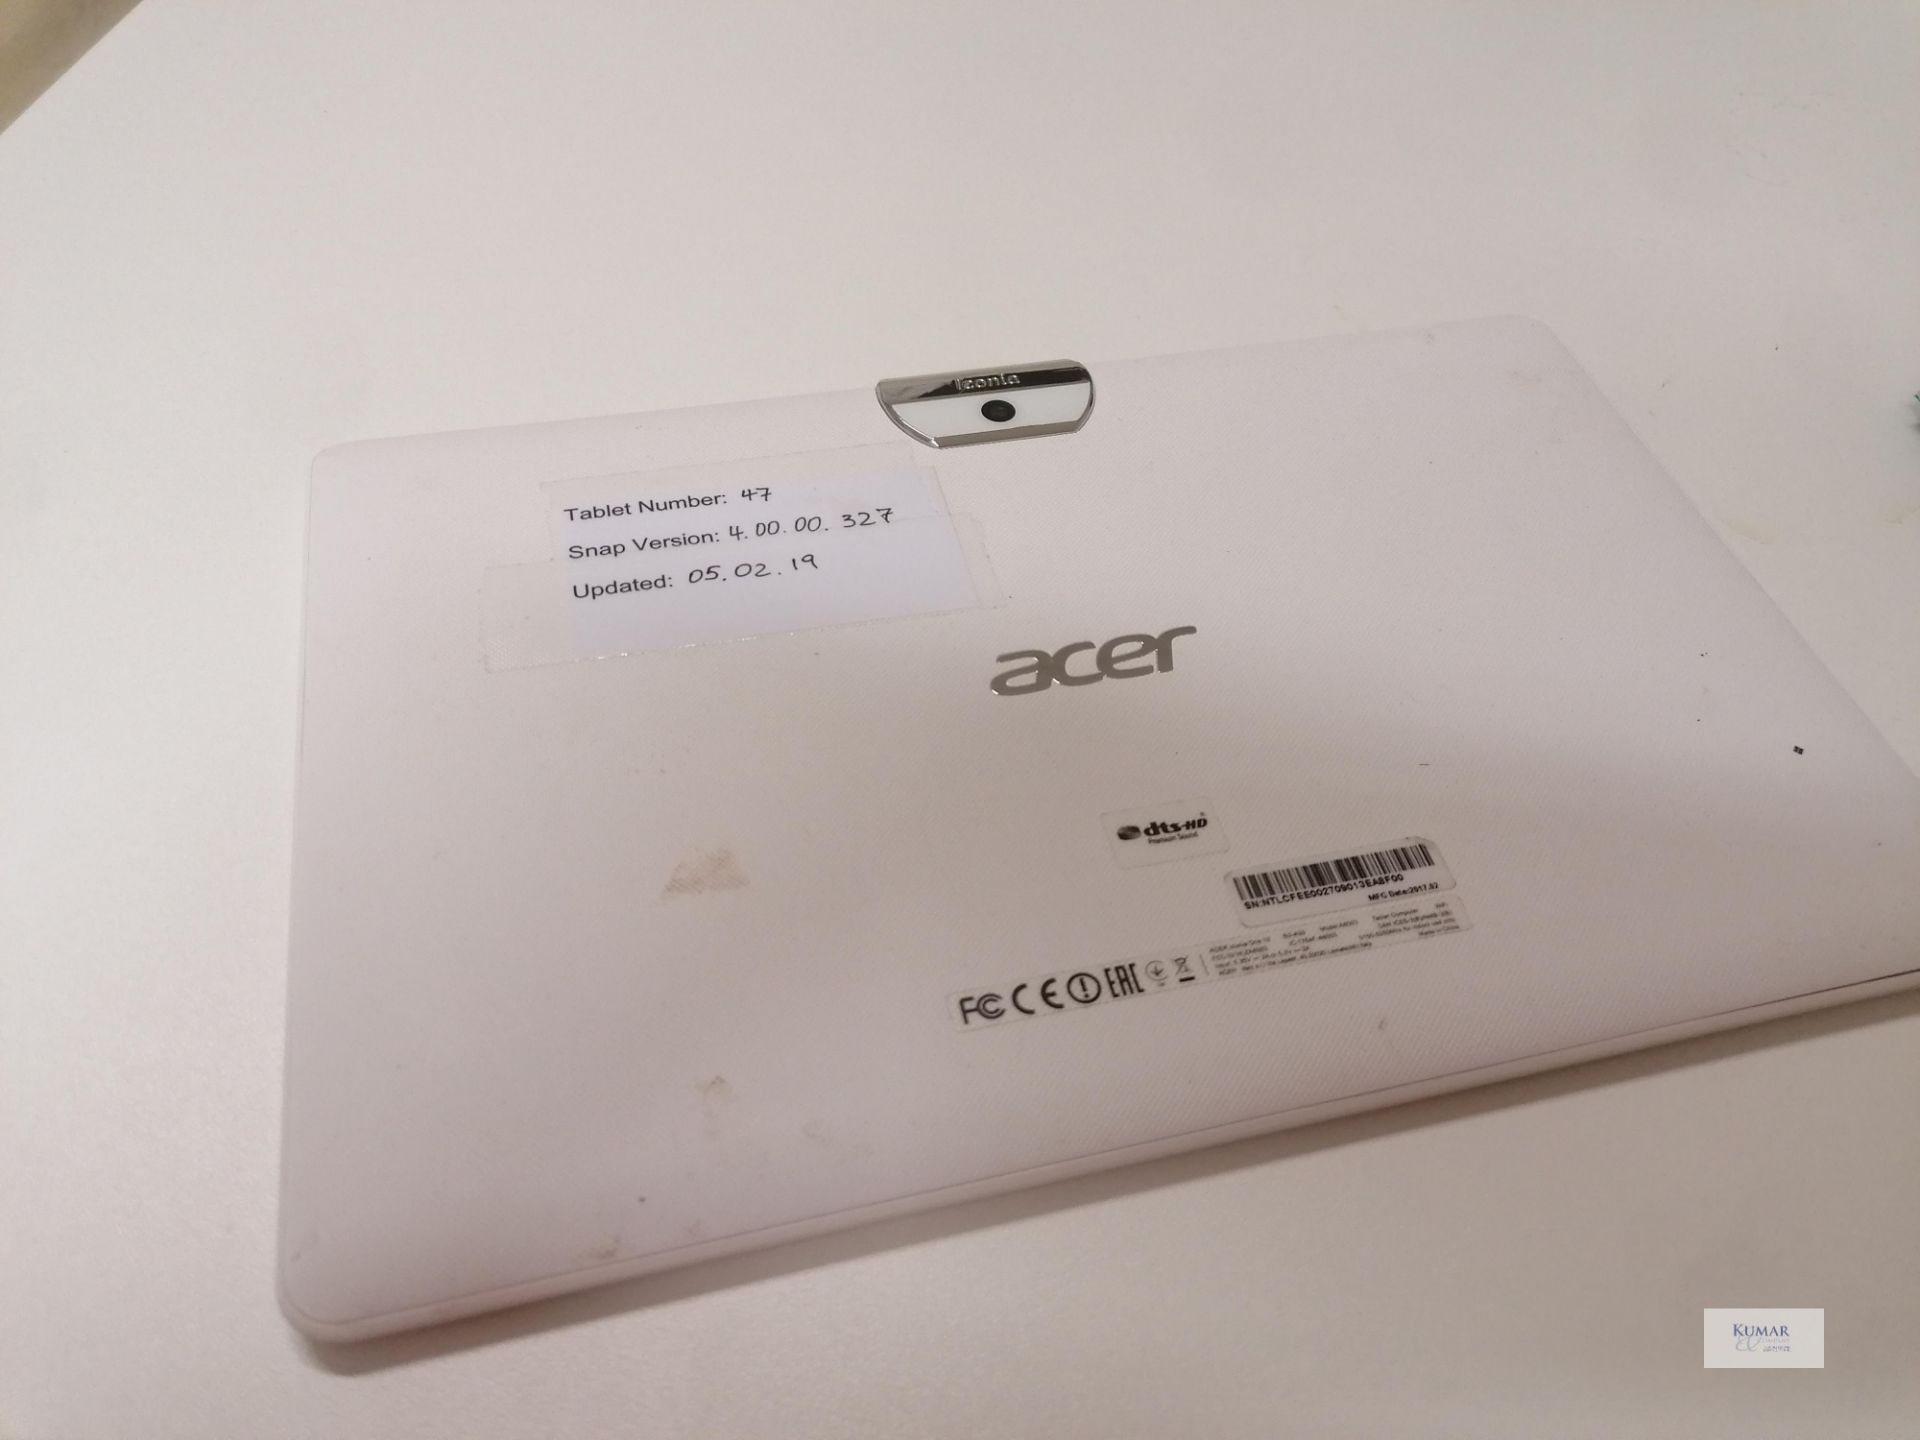 Acer Iconia One 10 B3-A30 Model A5003 Tablet Man 02 2017 Updated 05 02 2019 - Image 3 of 5